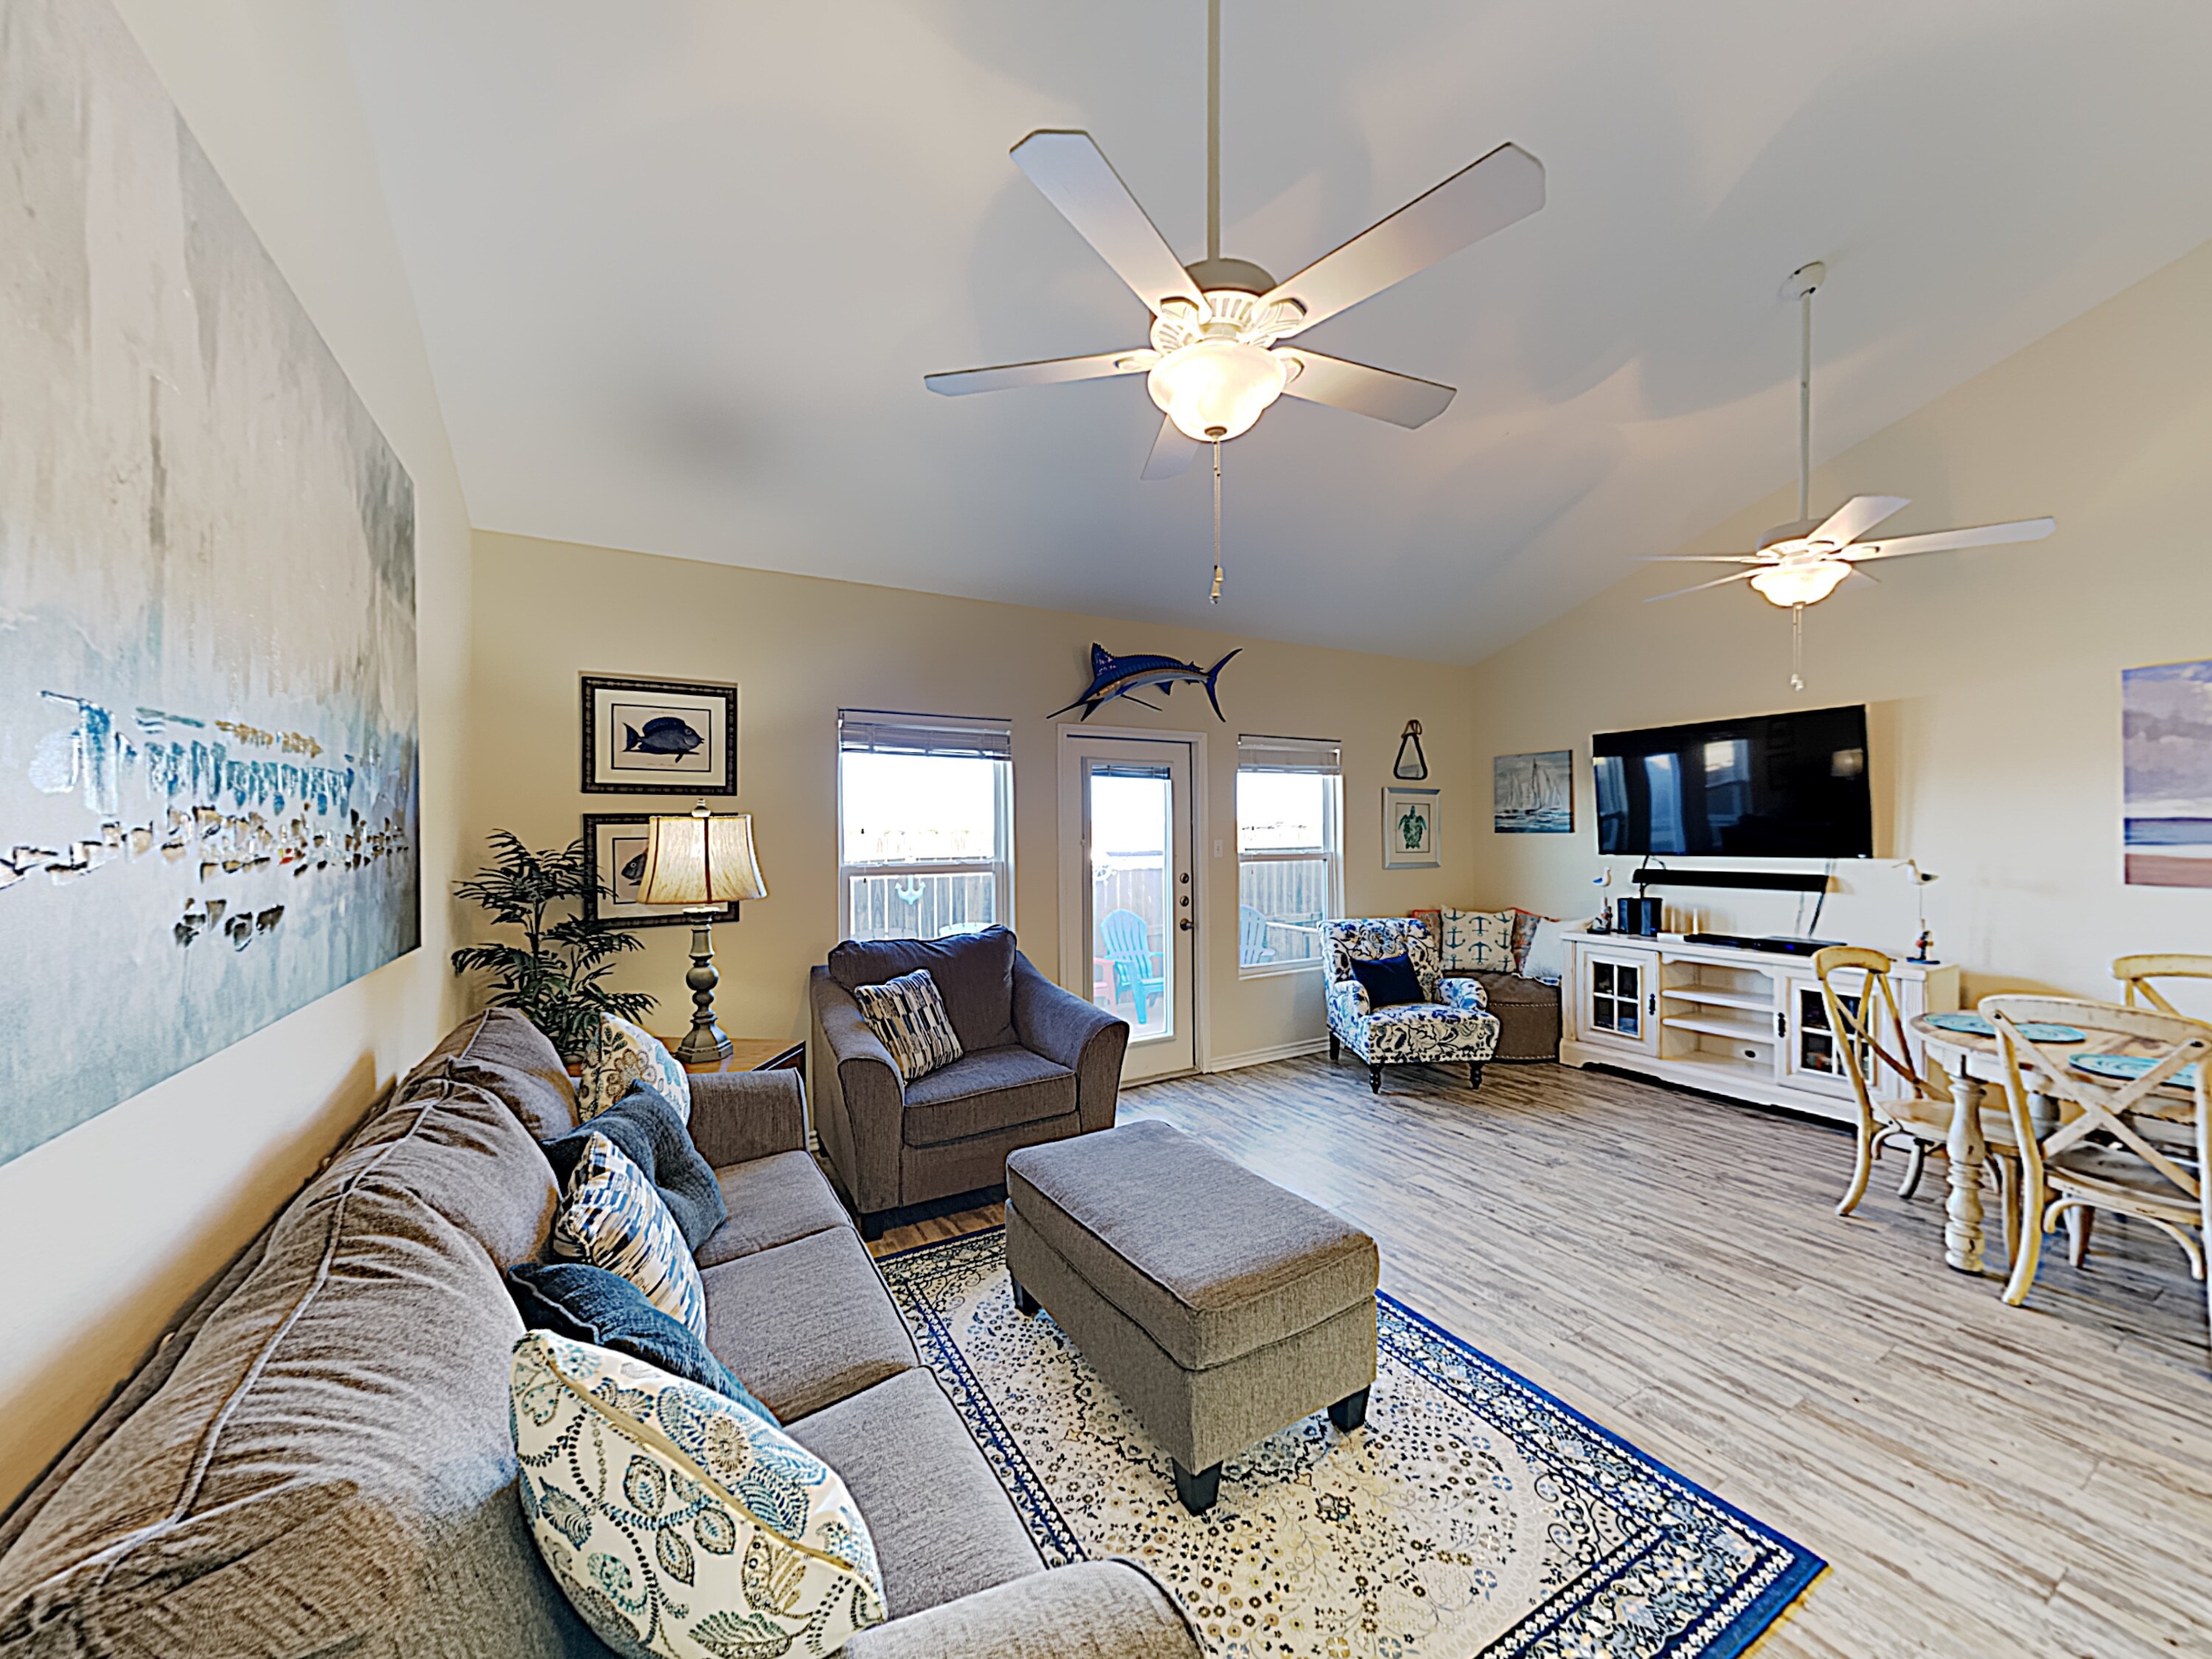 Welcome to Corpus Christi! This townhome is professionally managed by TurnKey Vacation Rentals.